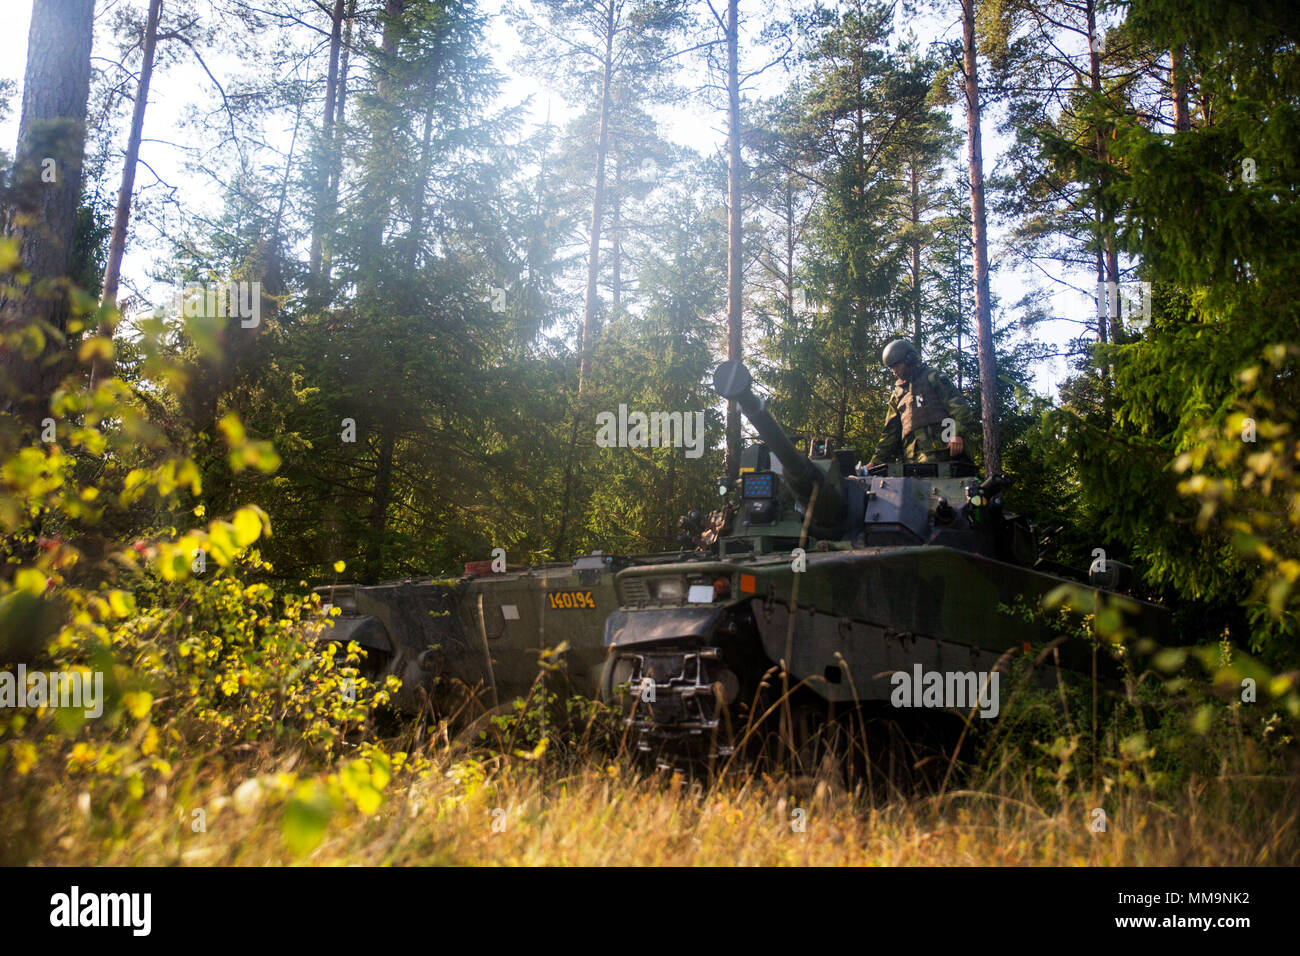 Swedish soldier changes turret position of the Swedish Strf-90 tracked infantry fighting vehicle during Exercise Aurora 17 in Lärbro, Sweden, Sept. 21, 2017. Aurora 17 is the largest Swedish national exercise in more than 20 years, and it includes supporting forces from the U.S. and other nations in order to exercise Sweden’s defense capability and promote common regional security. (U.S. Marine Corps photo by SSgt. Marcin Platek/Released) Stock Photo